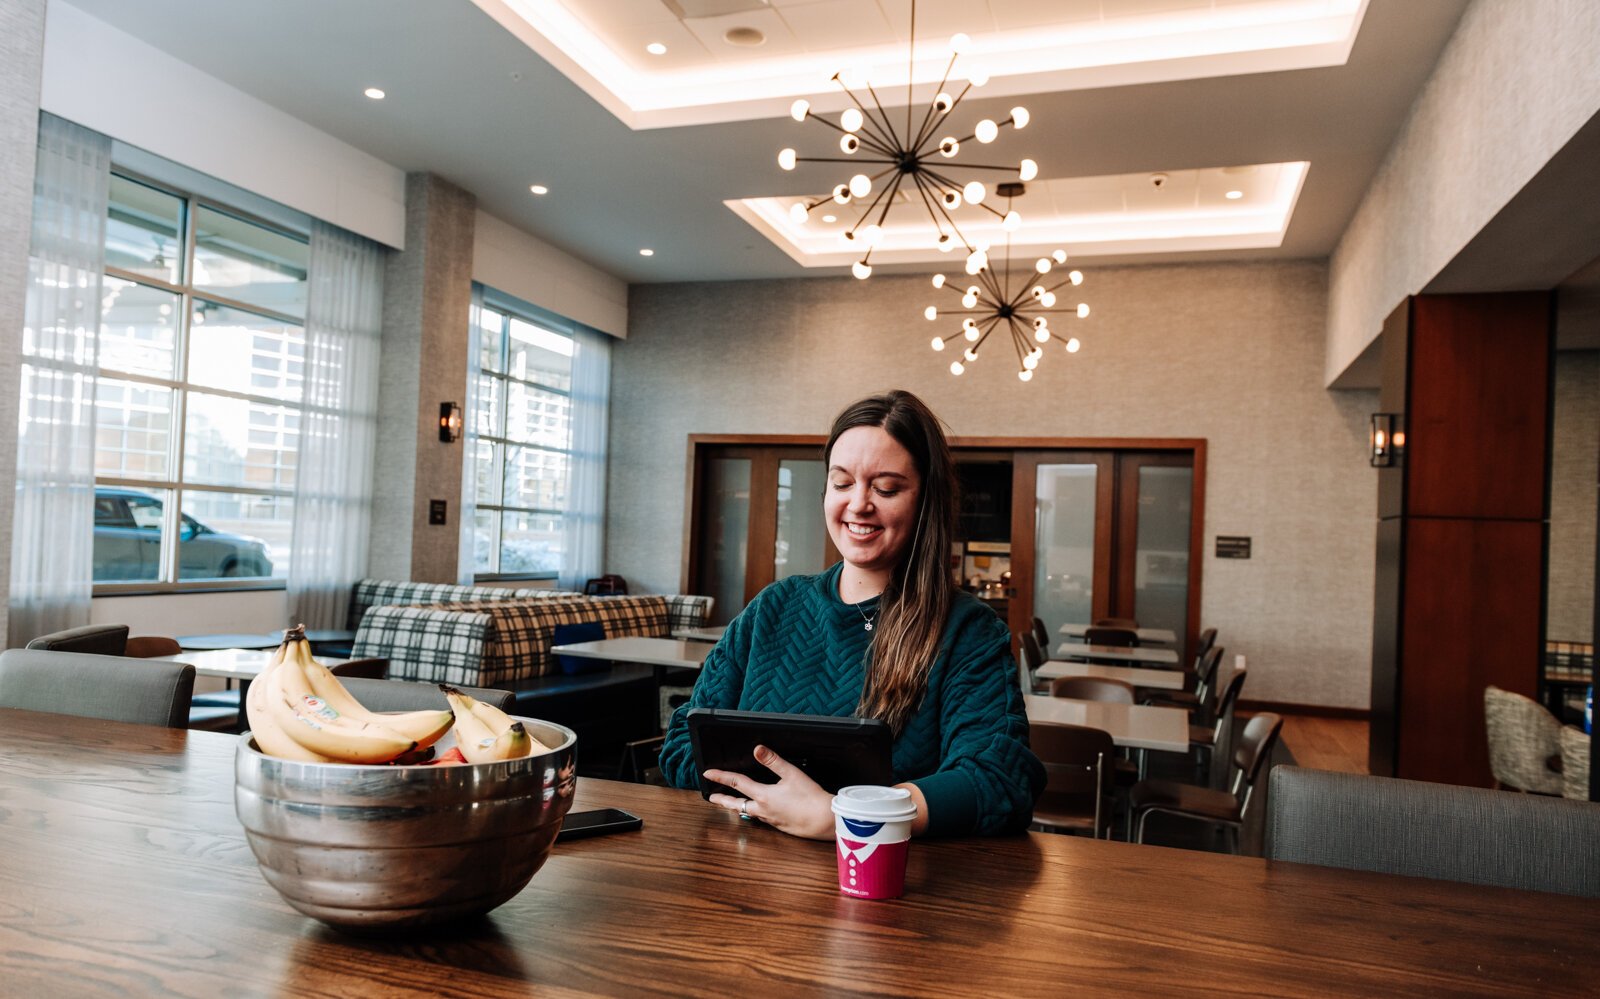 Laura Heiman utilizes the lobby while working remotely at Hampton Inn & Suites in Downtown.